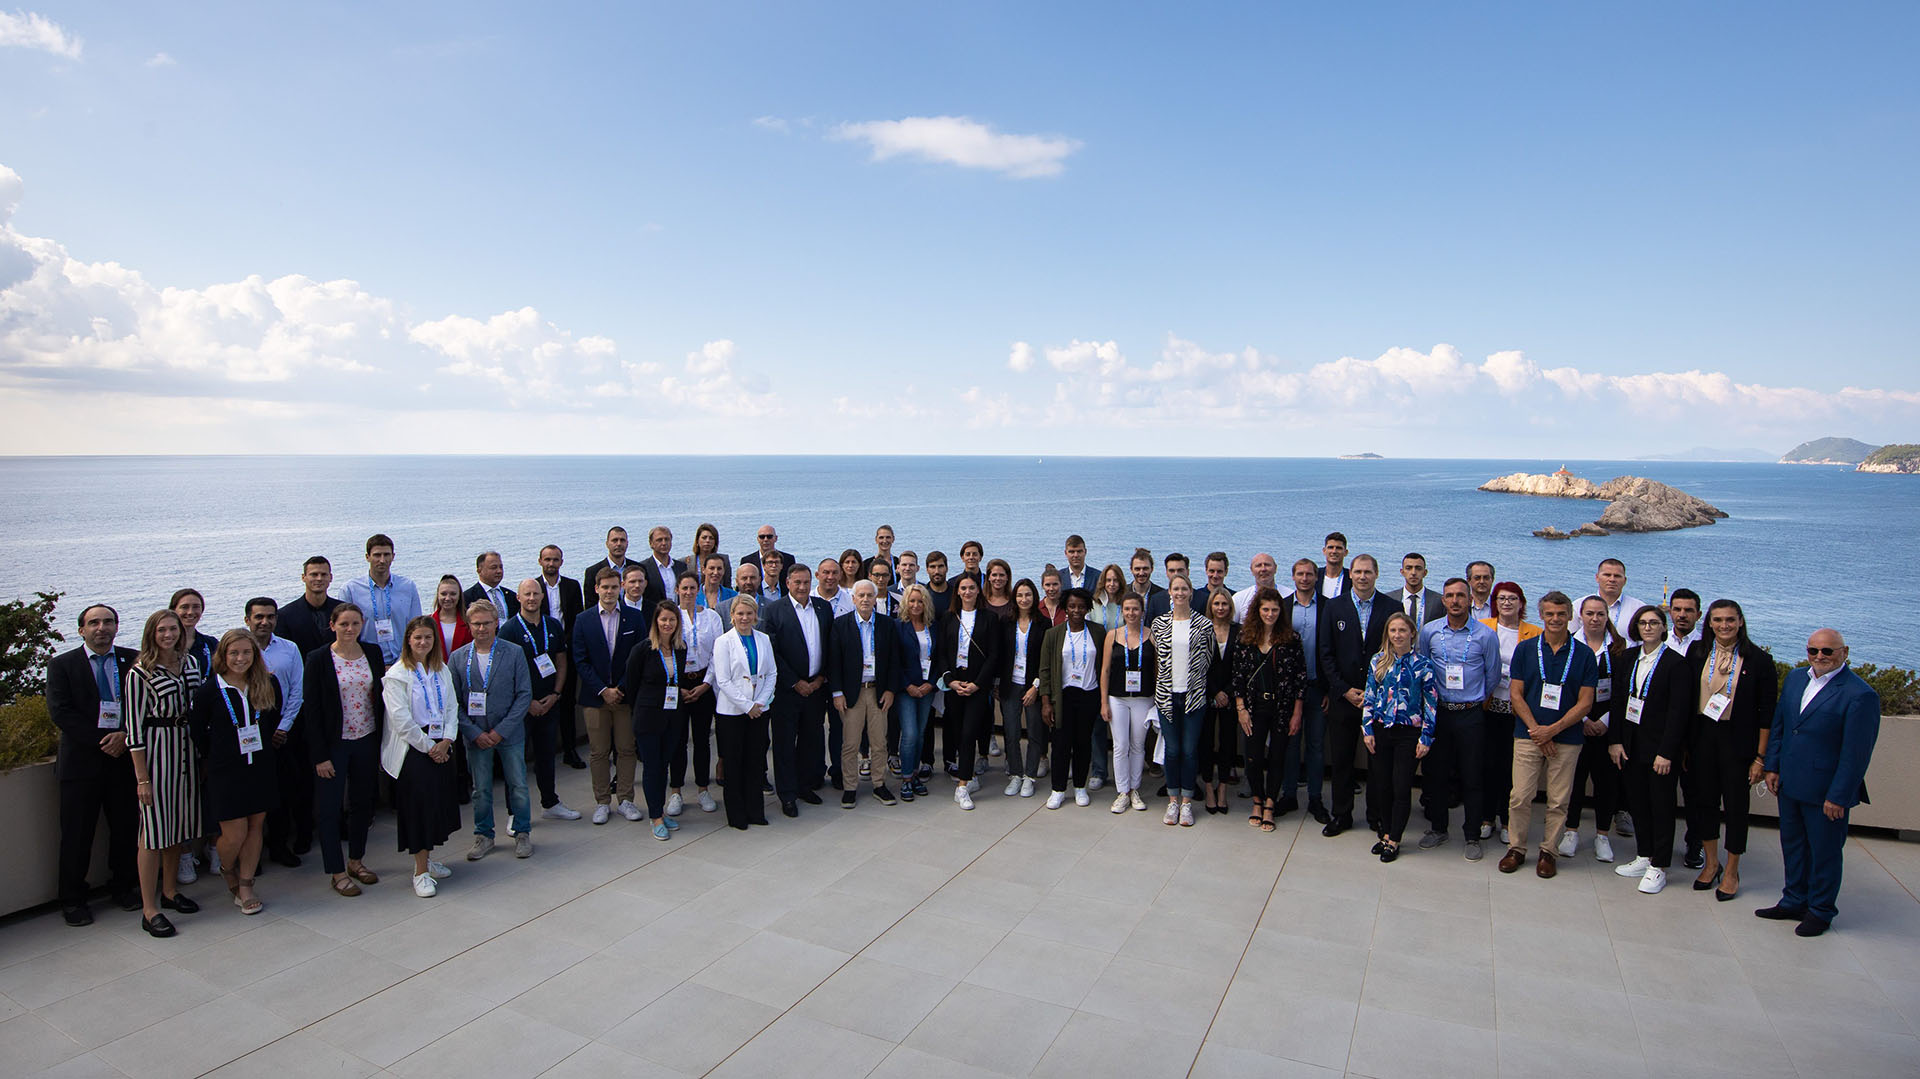 Participants at the Sixth Assembly of the European Athletes in Dubrovnik, Croatia (EOC)